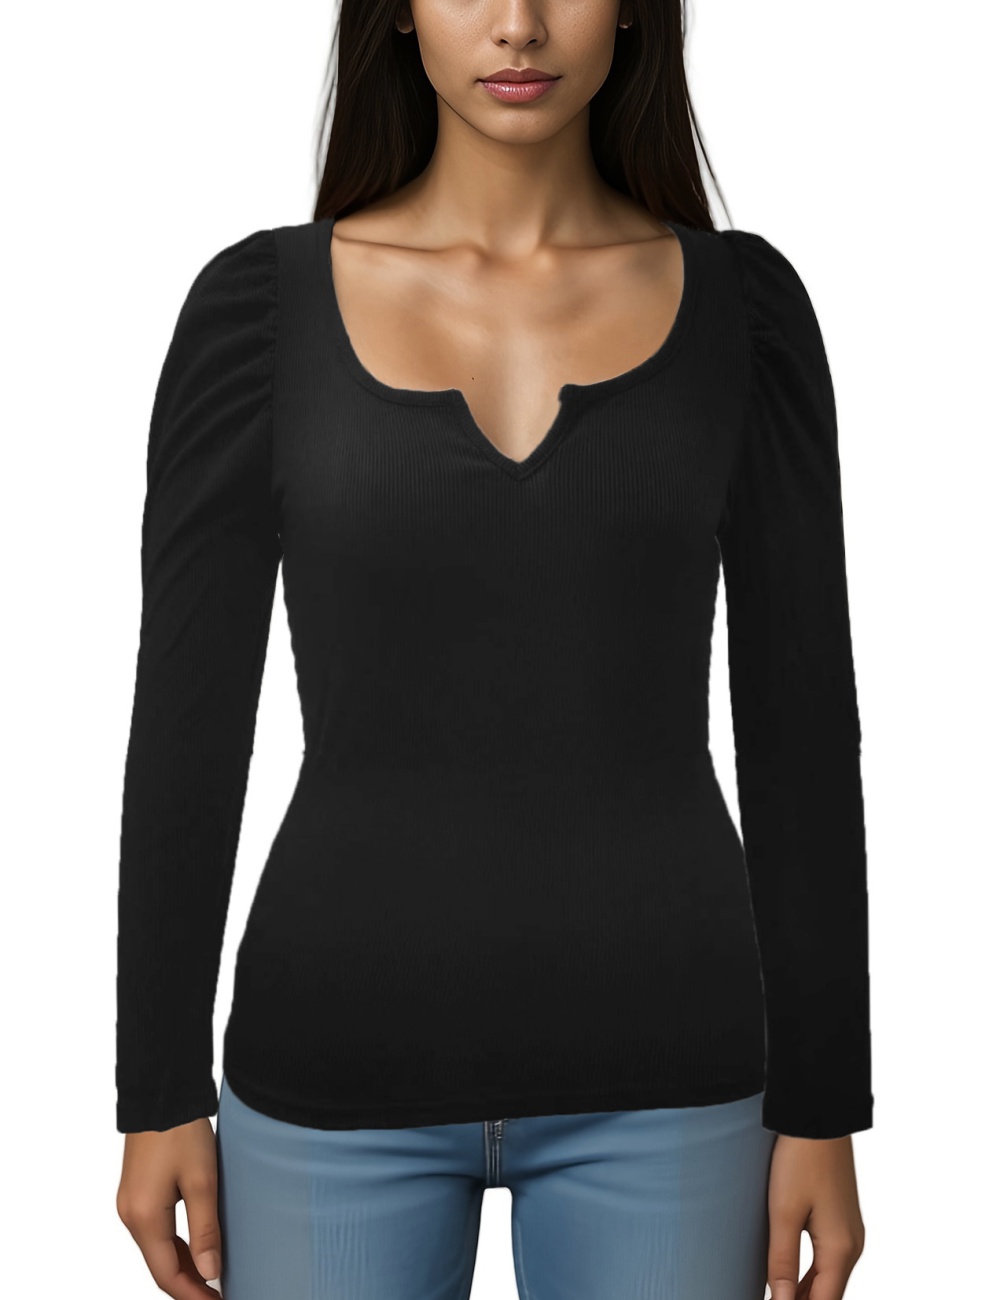 Temperament long sleeve tops simple pure T-shirt for women